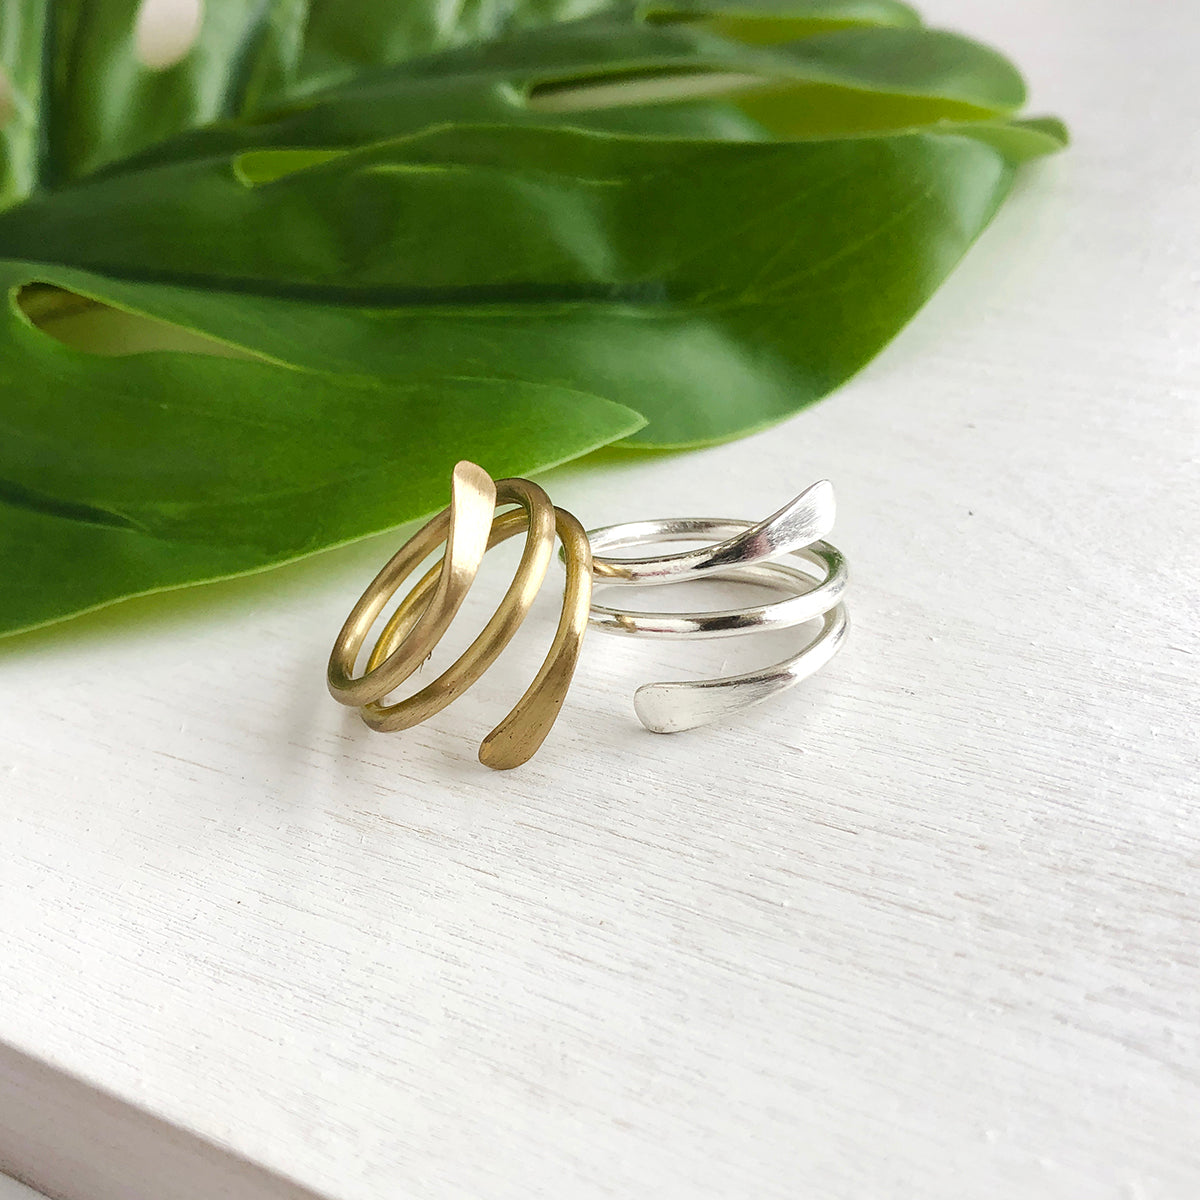 Handcrafted Fair Trade Rings • WorldFinds